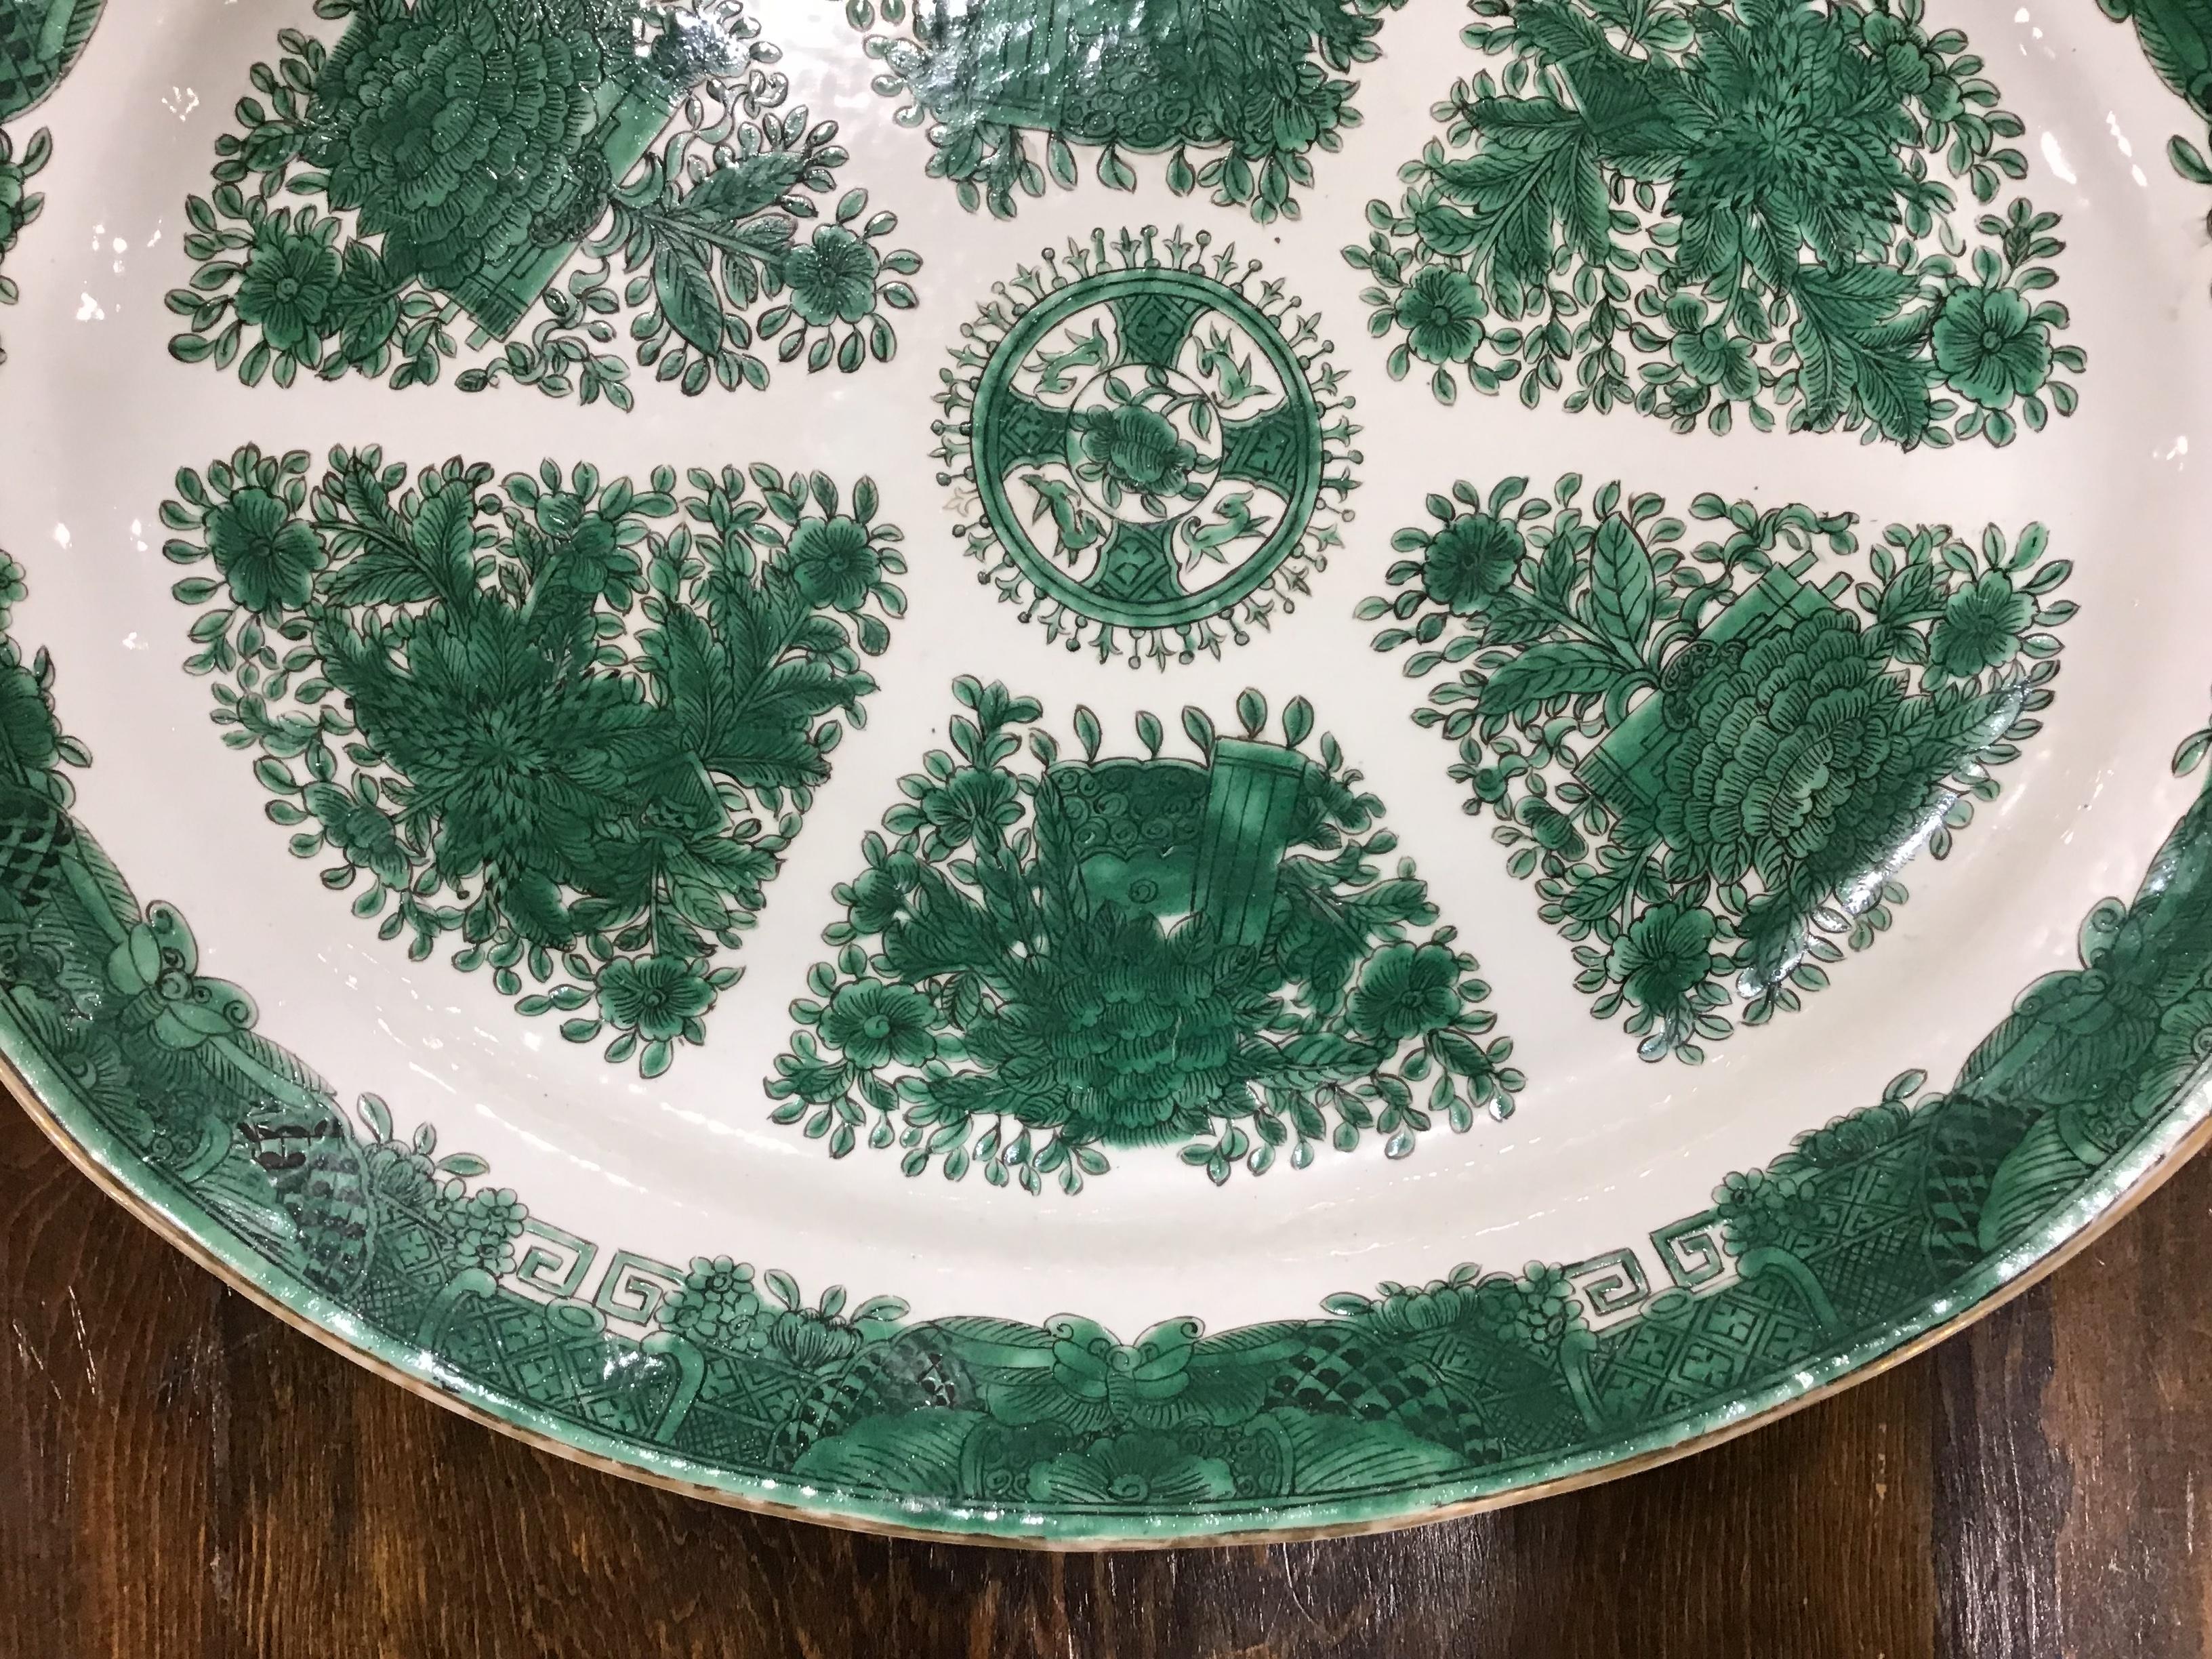 Late 18th to early 19th century Chinese Export green Fitzhugh oval platter in a classic quadrant pattern with center medallion and diaper border. The name Fitzhugh derives from Englishman Thomas Fitzhugh in association with a service that he ordered